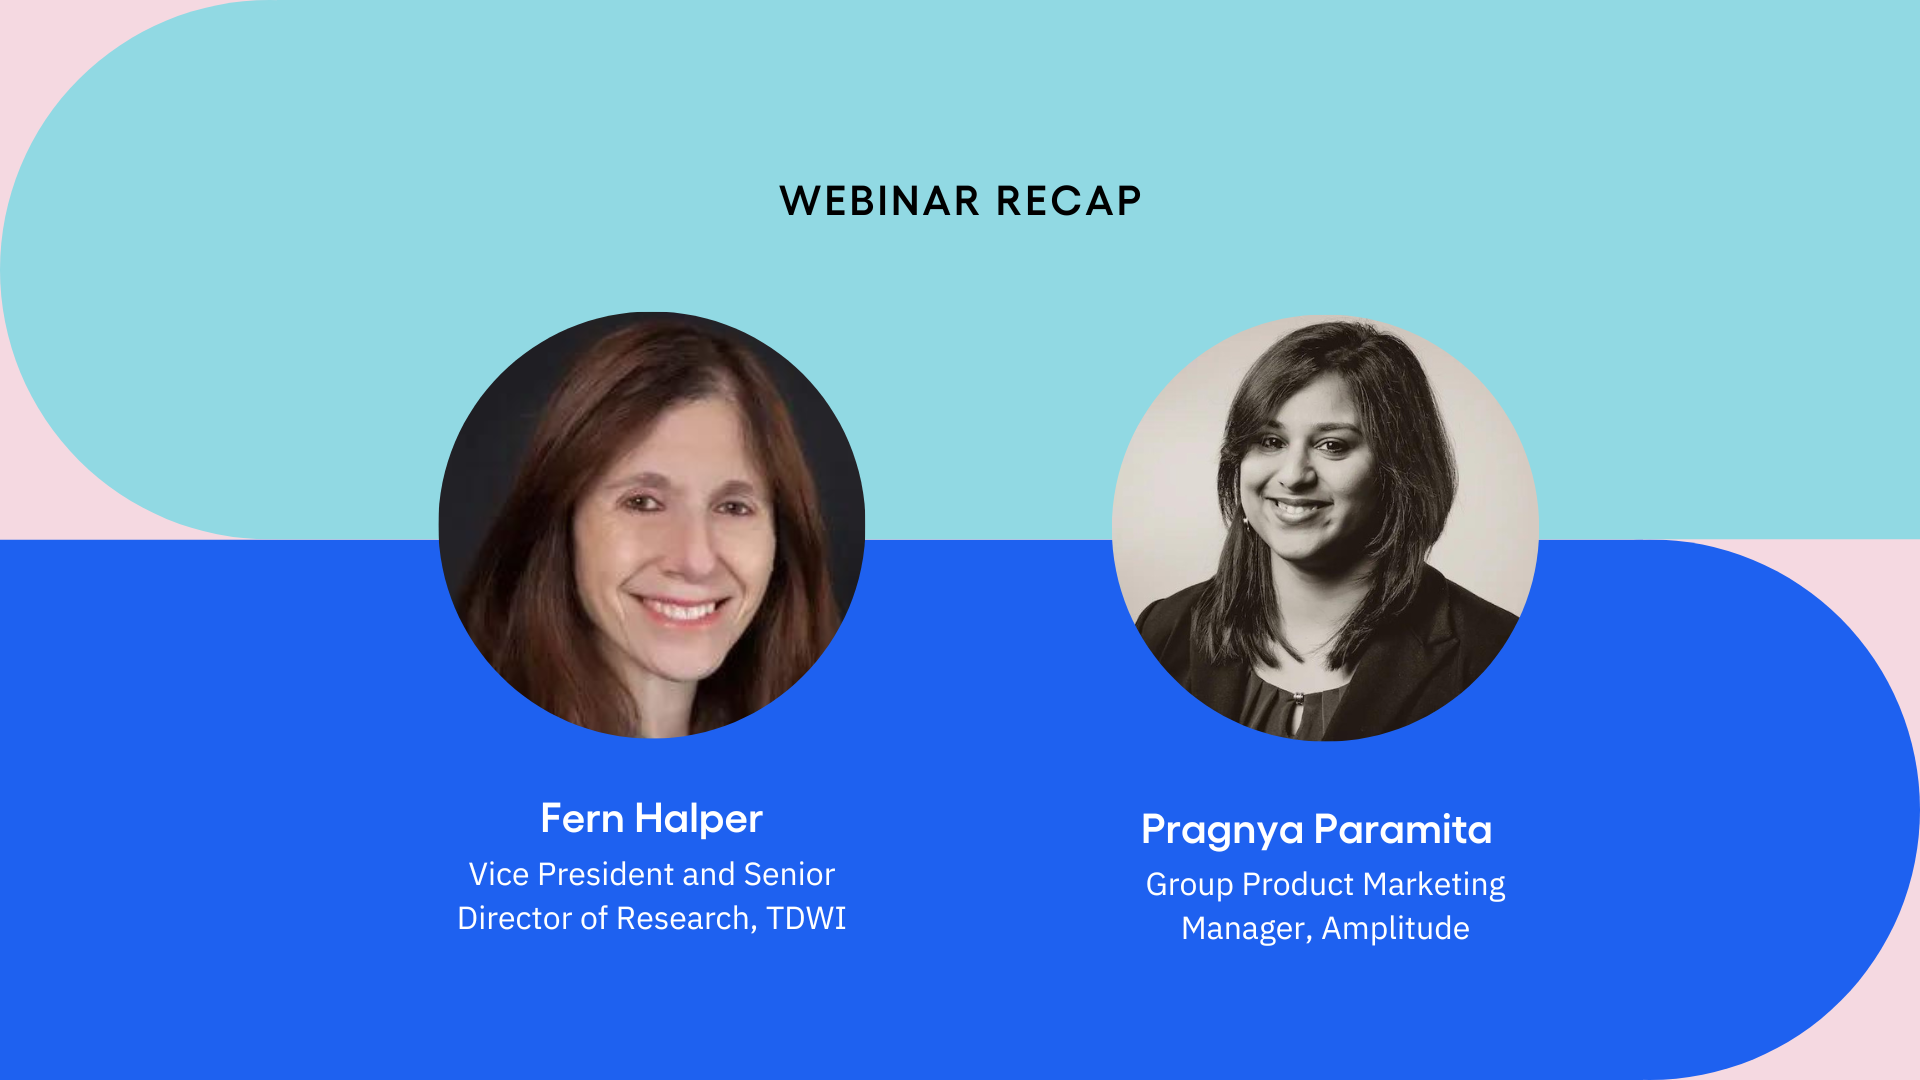 Side-by-side headshots featuring Fern Halper, VP and Senior Director of Research at TDWI, and Pragnya Paramita, Group Product Marketing Manager at Amplitude